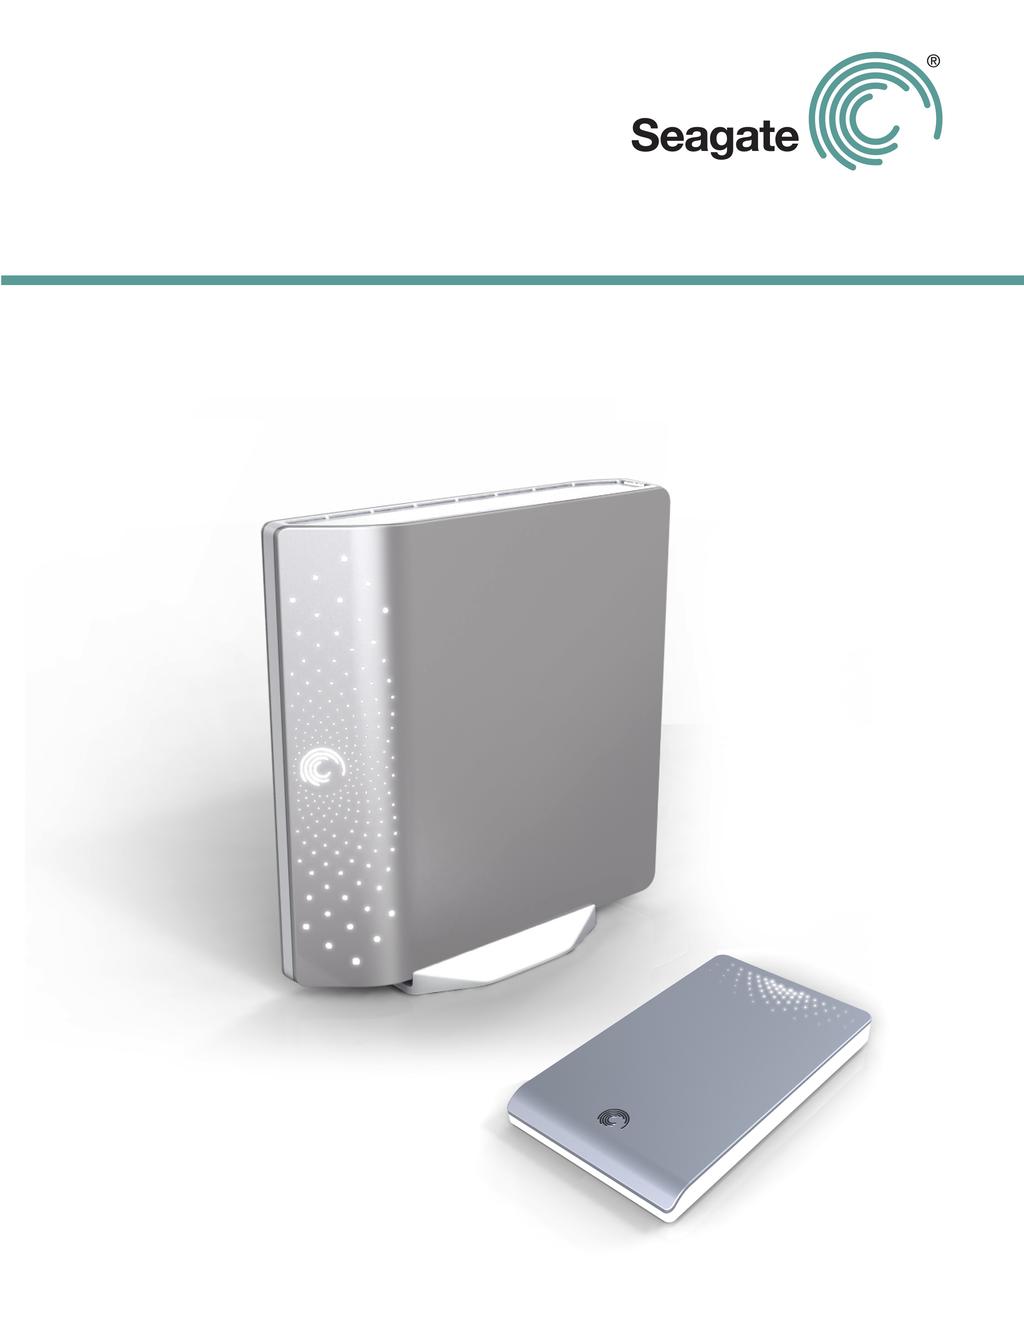 Seagate Manager User Guide For Use With Your